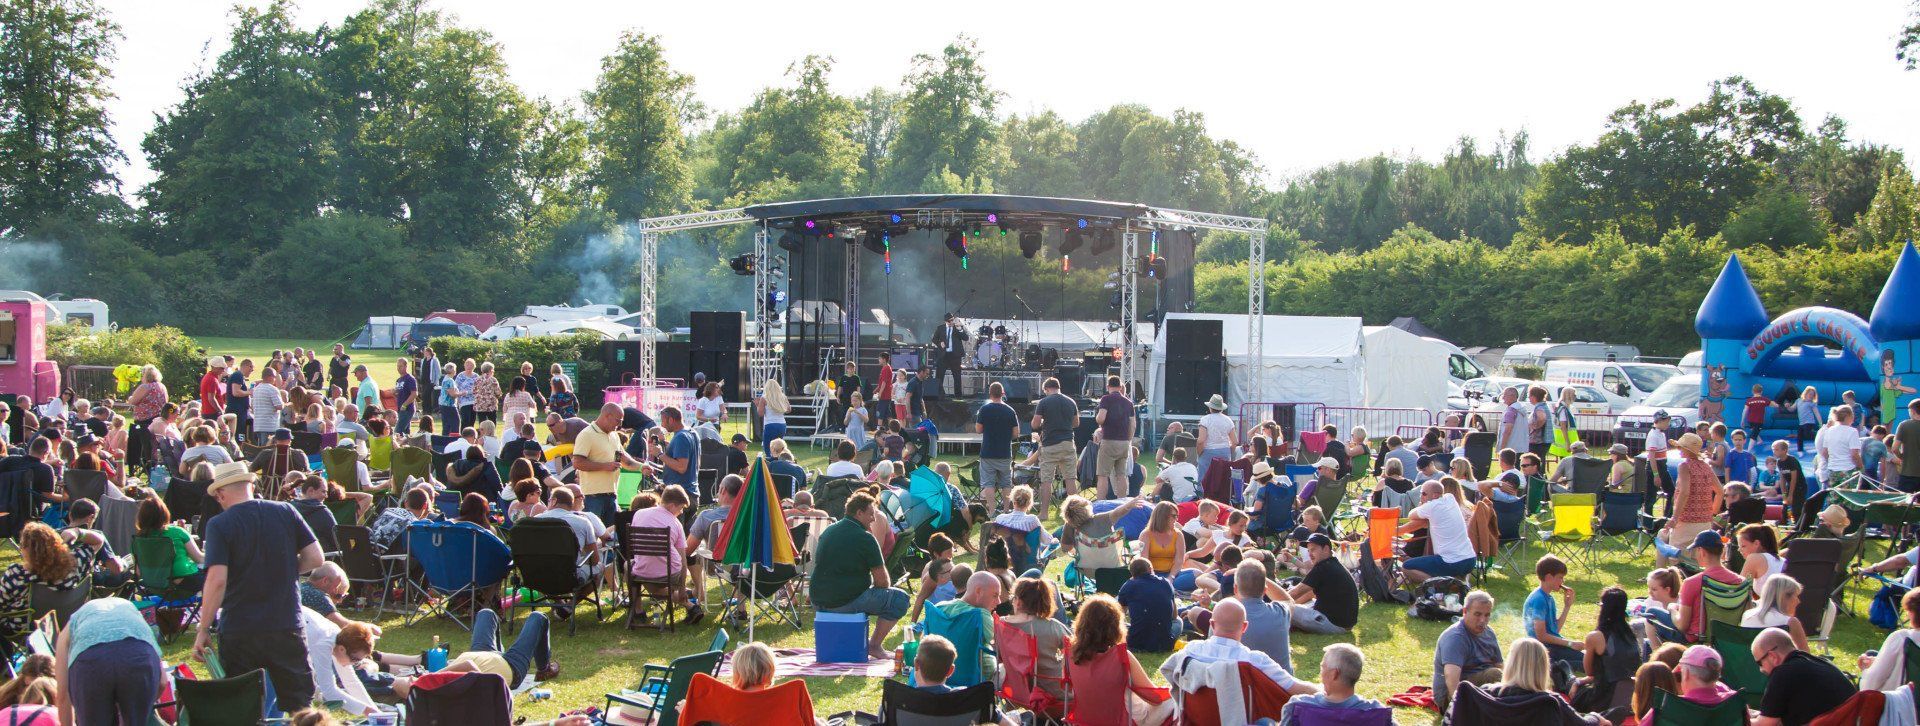 the extra large trailer stage with a large crowd in front